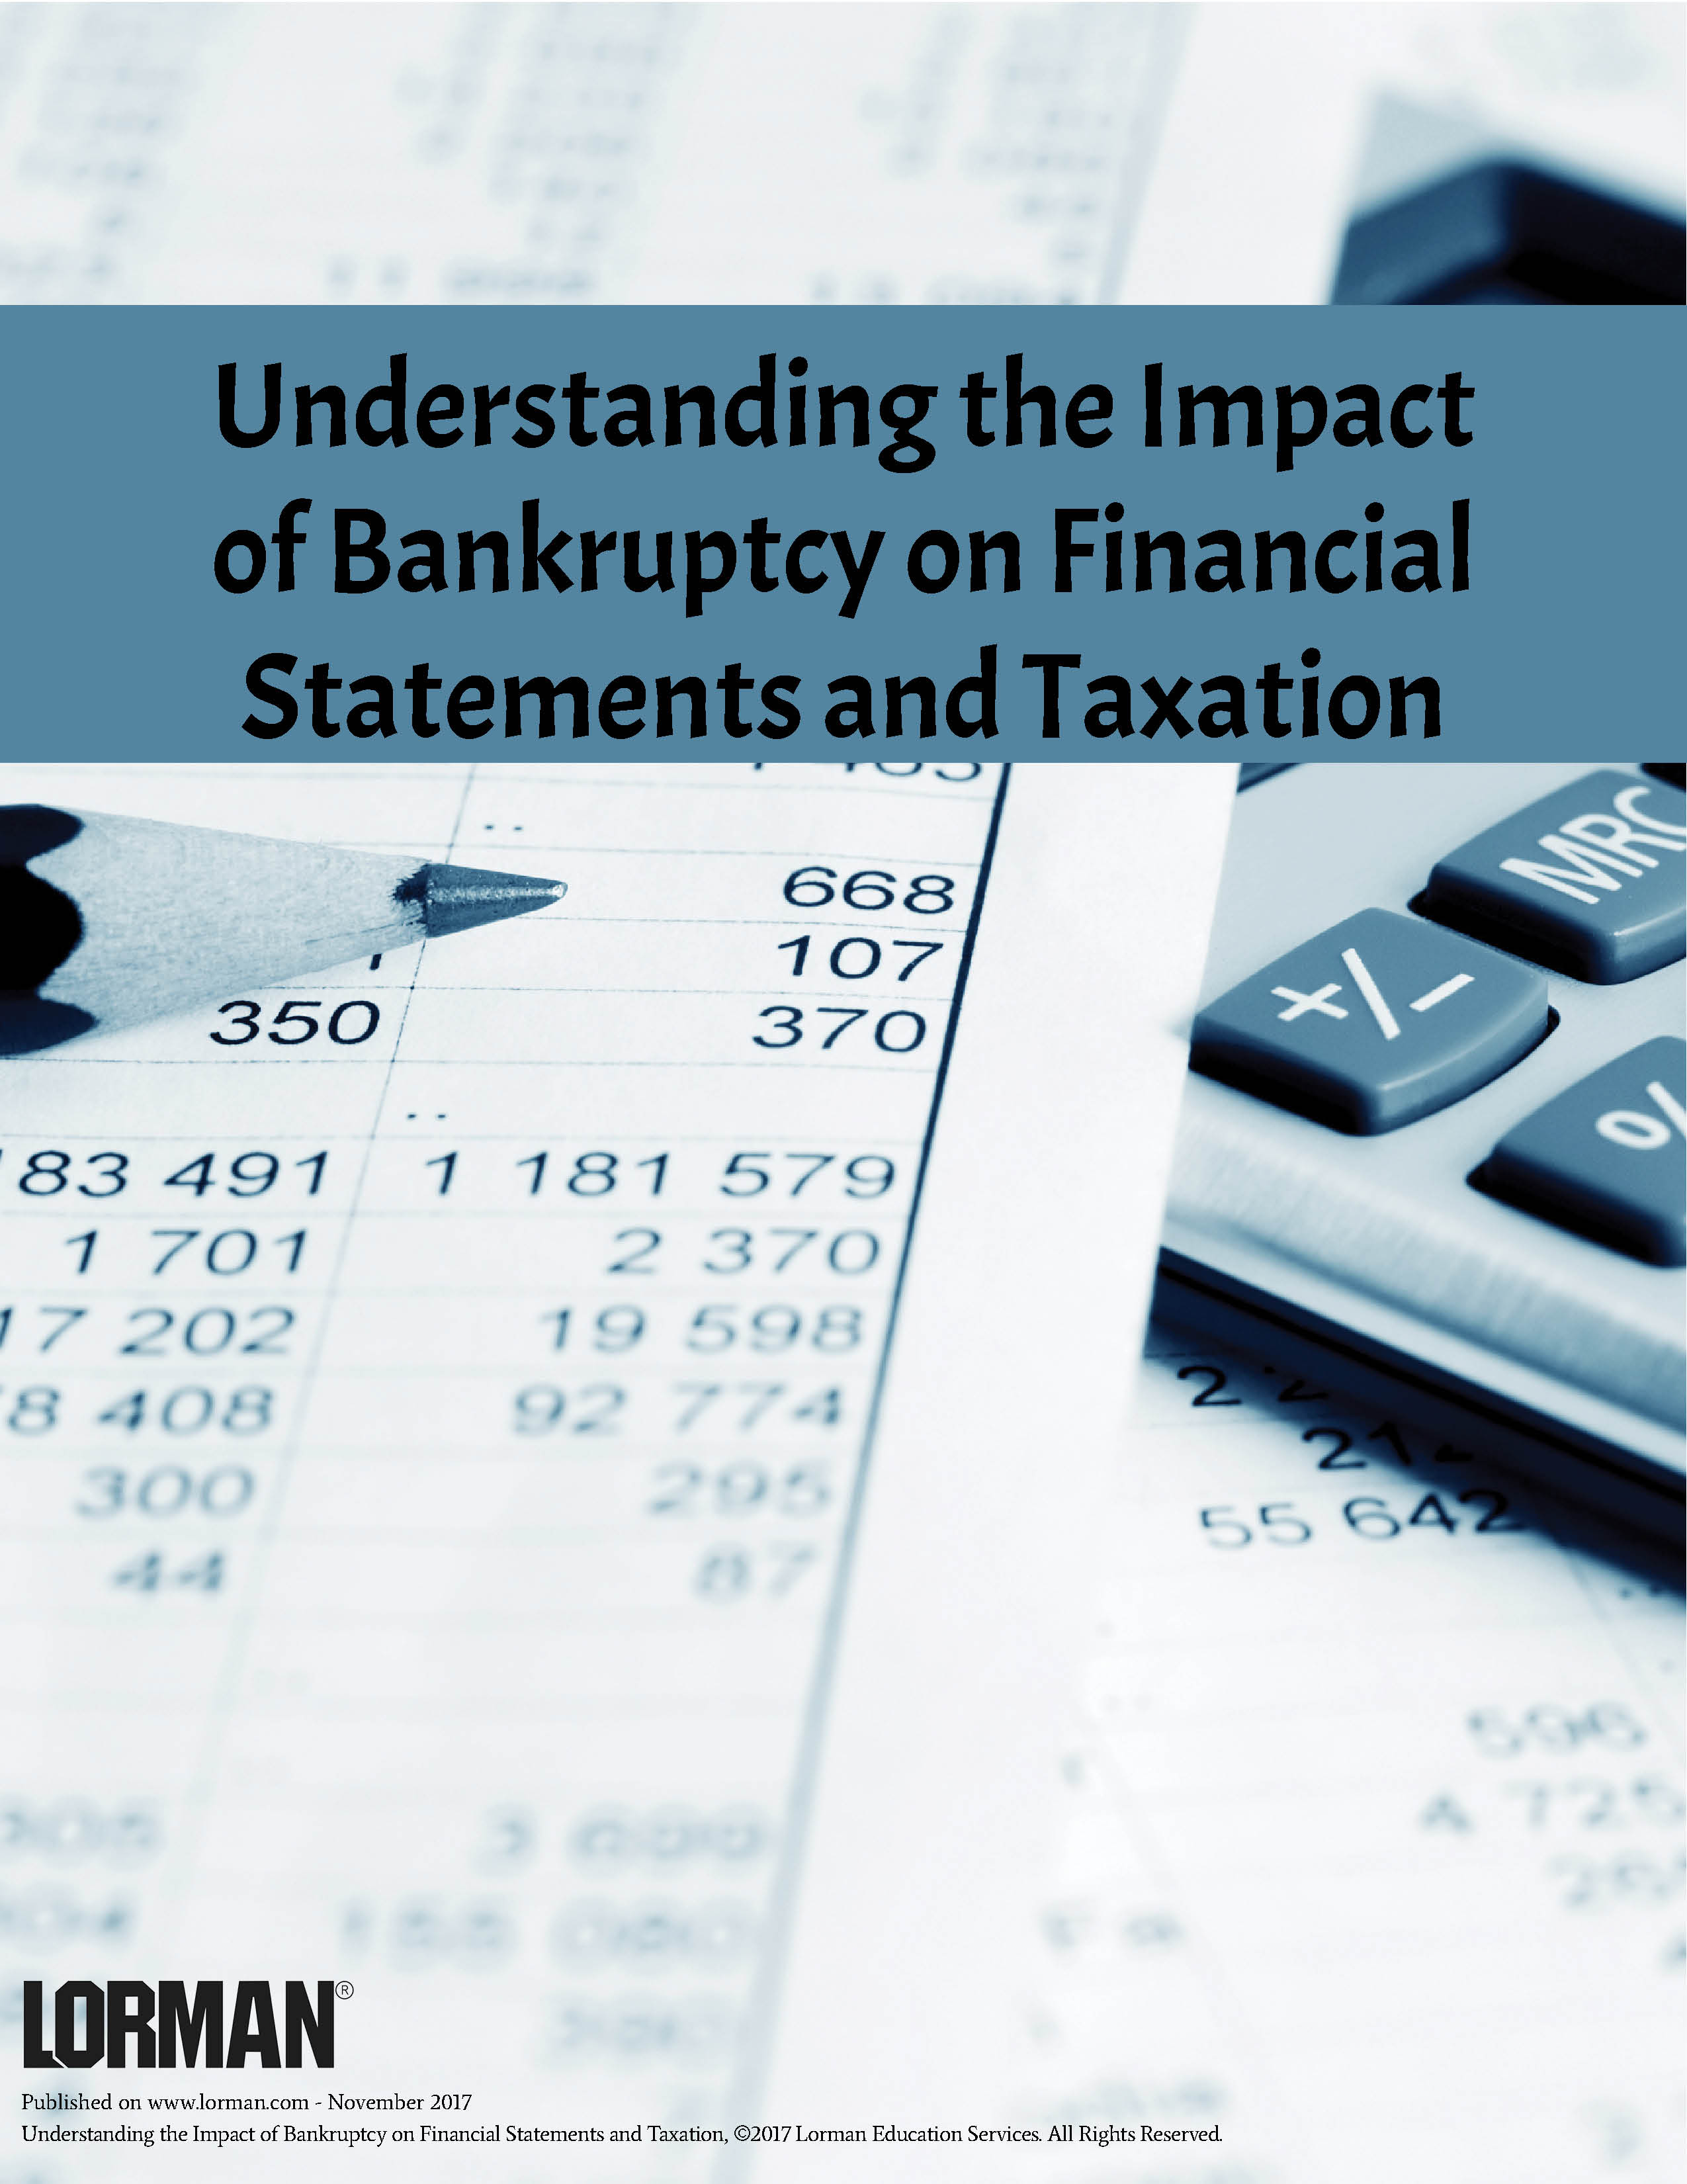 Understanding the Impact of Bankruptcy on Financial Statements and Taxation